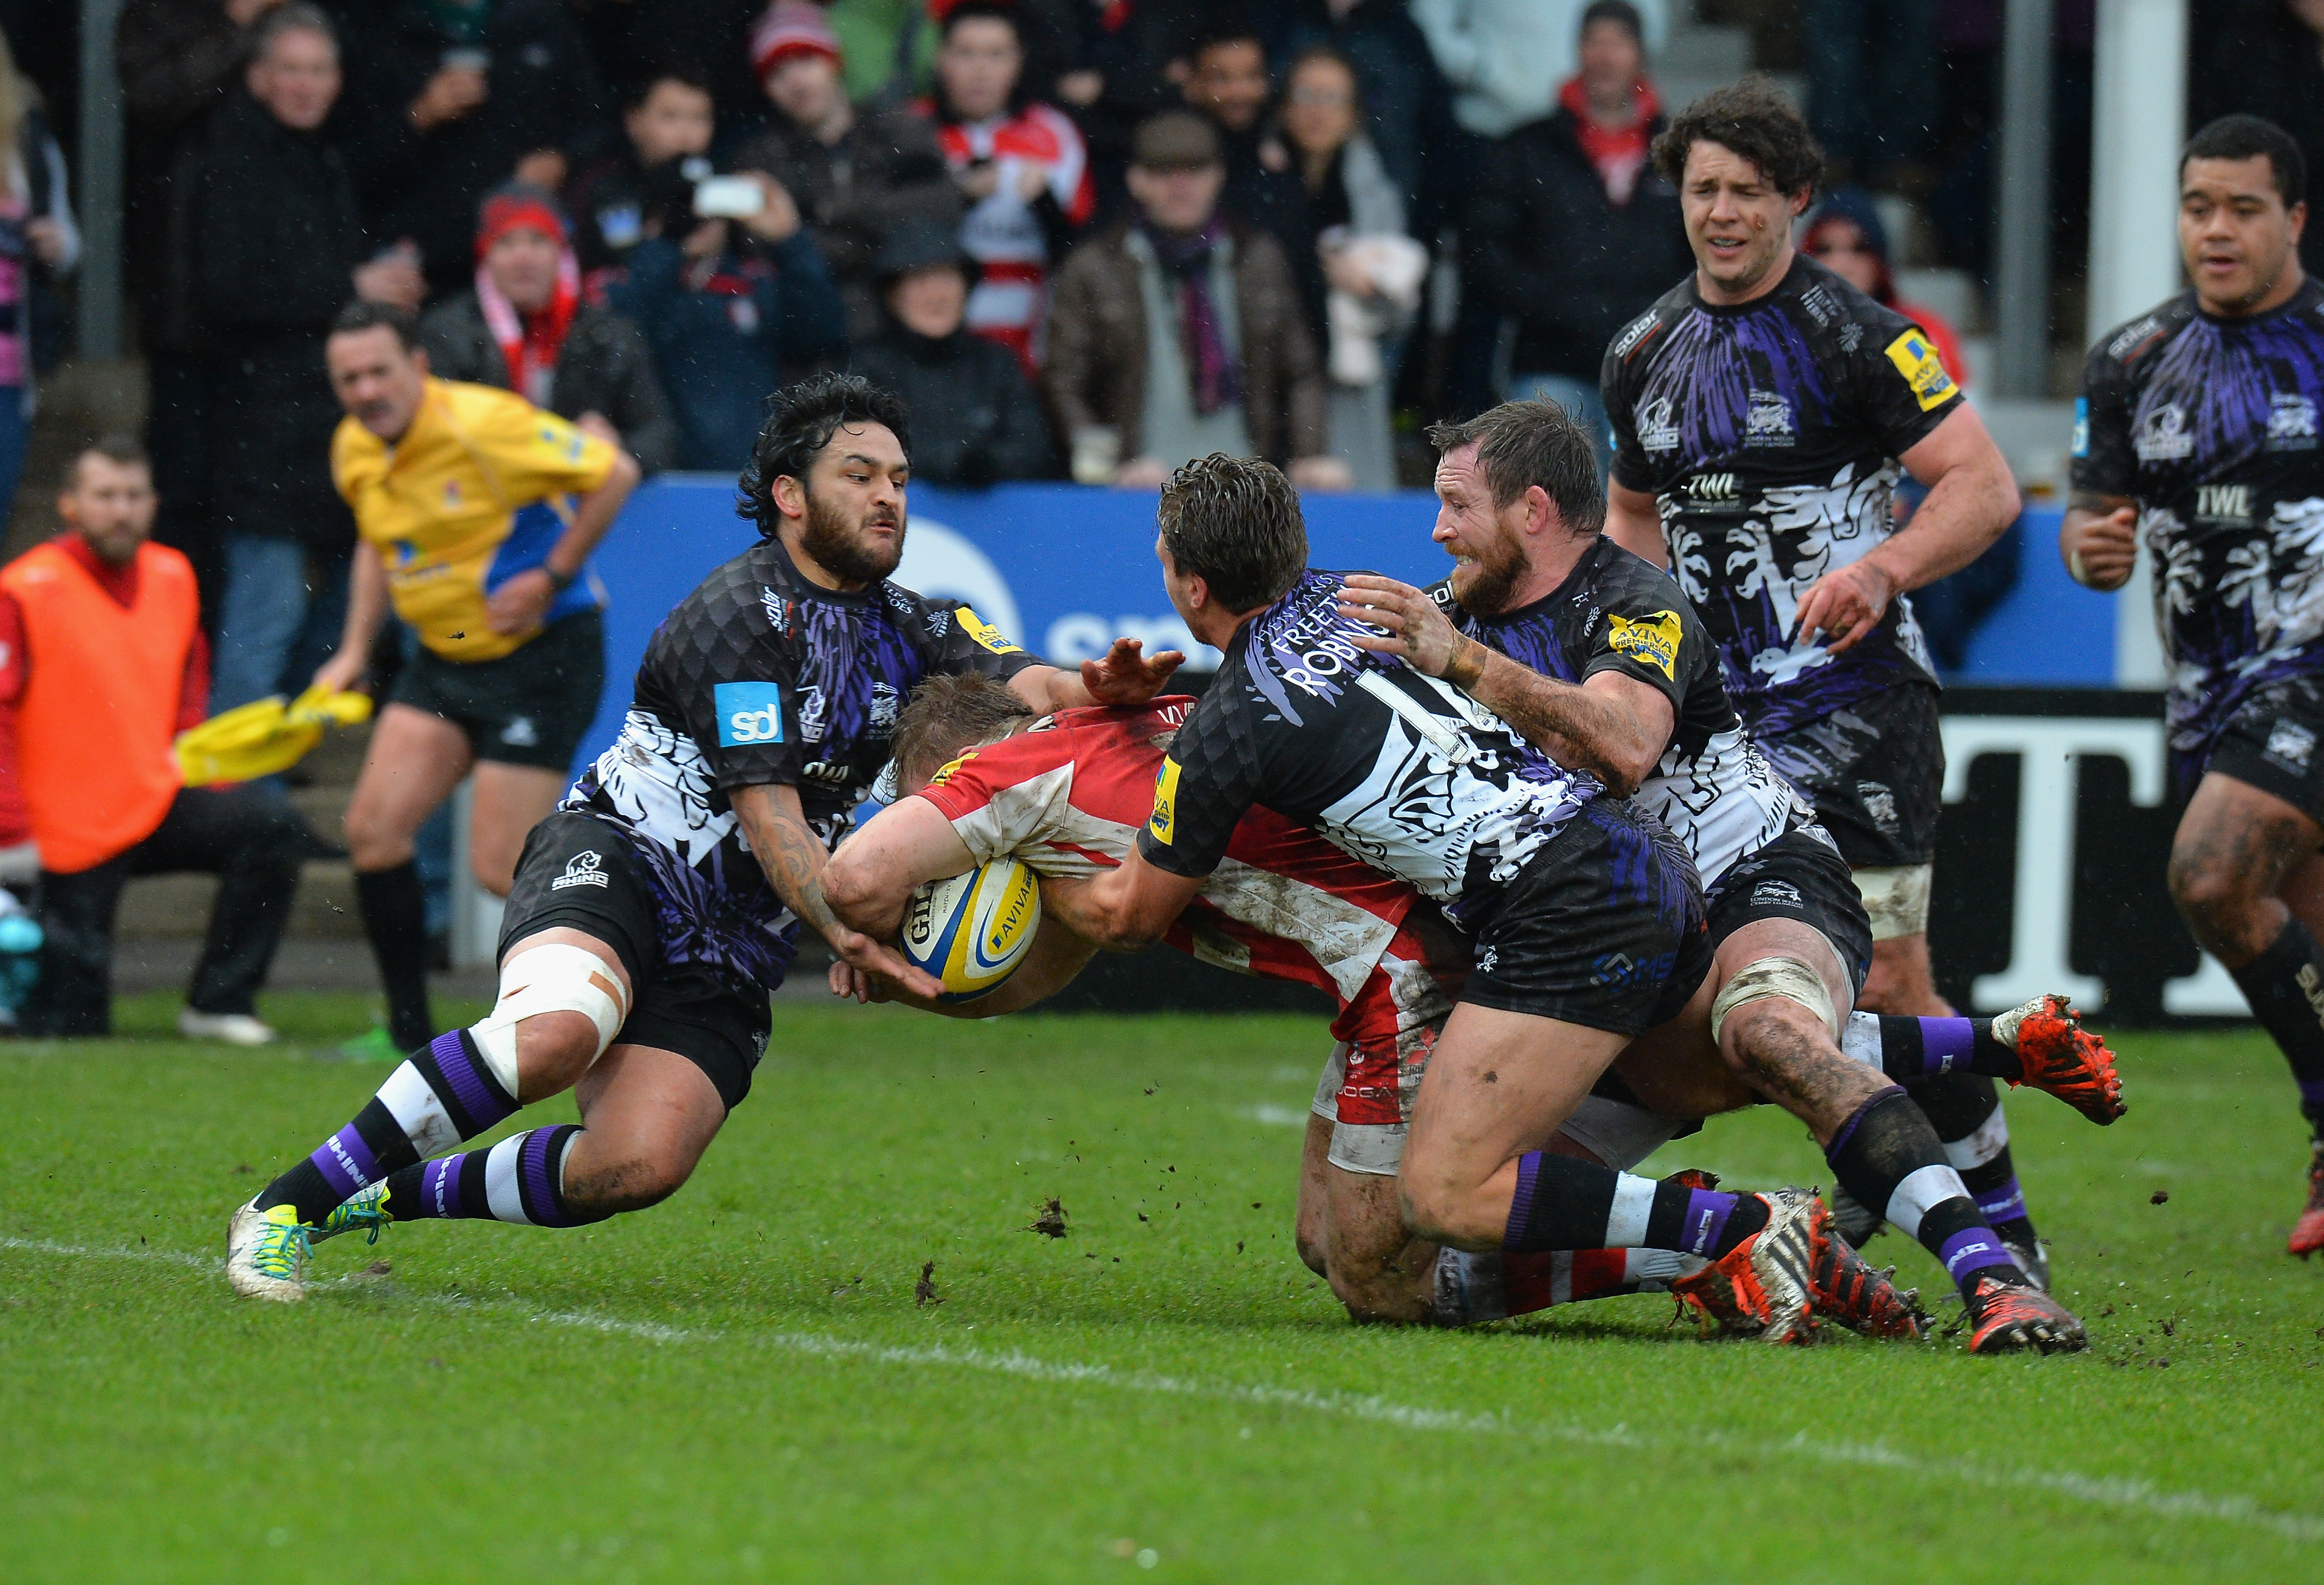 xxxx of Gloucester Rugby is tackled by xxxx of London Welsh during the Aviva Premiership match between Gloucester Rugby and London Welsh at Kingsholm Stadium on February 21, 2015 in Gloucester, England.